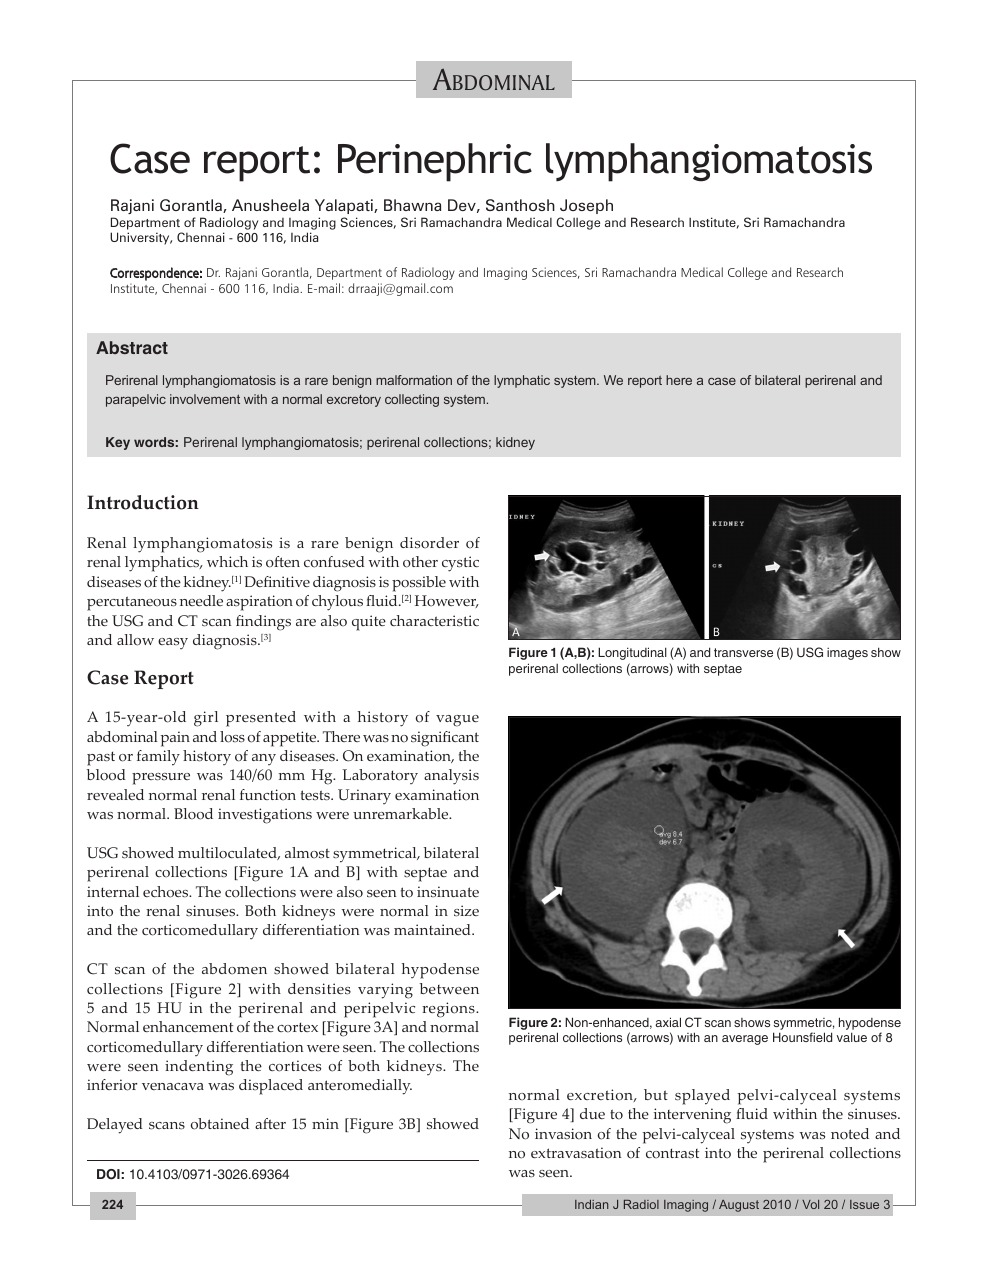 Case Report Perinephric Lymphangiomatosis Topic Of Research Paper In Clinical Medicine Download Scholarly Article Pdf And Read For Free On Cyberleninka Open Science Hub